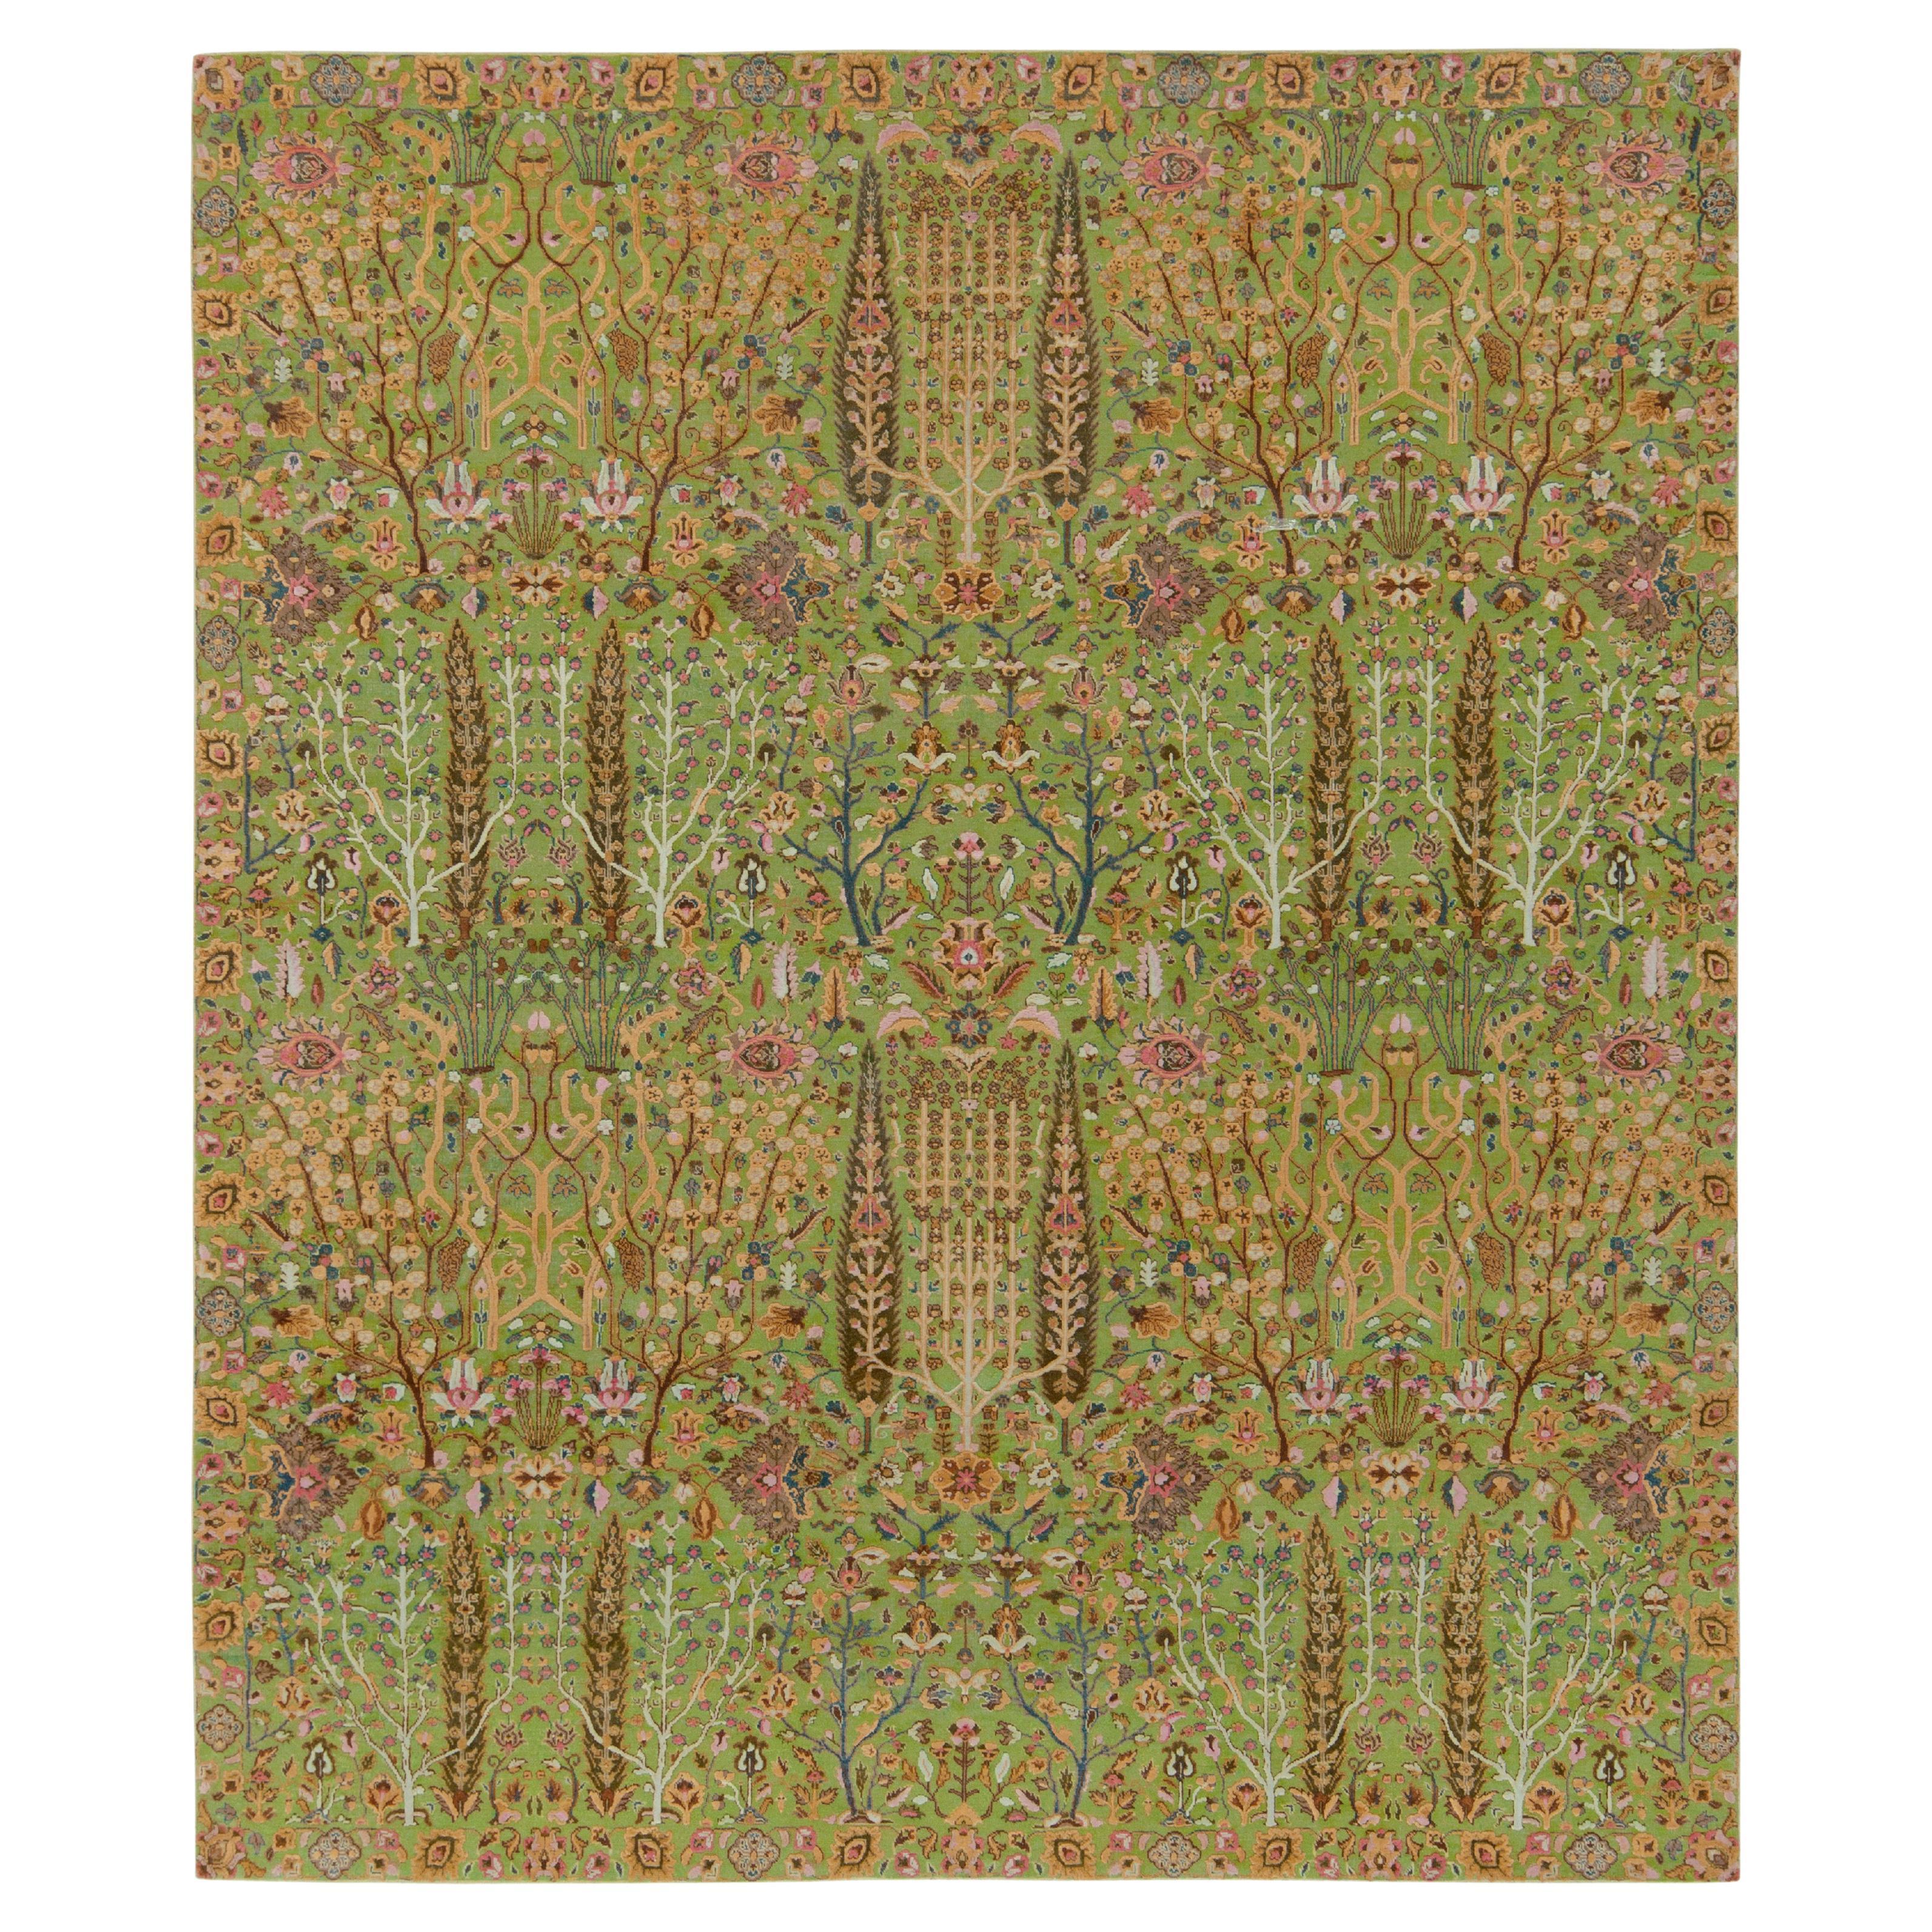 Rug & Kilim’s Classic Style Rug in Green, Pink, Brown Floral Pattern